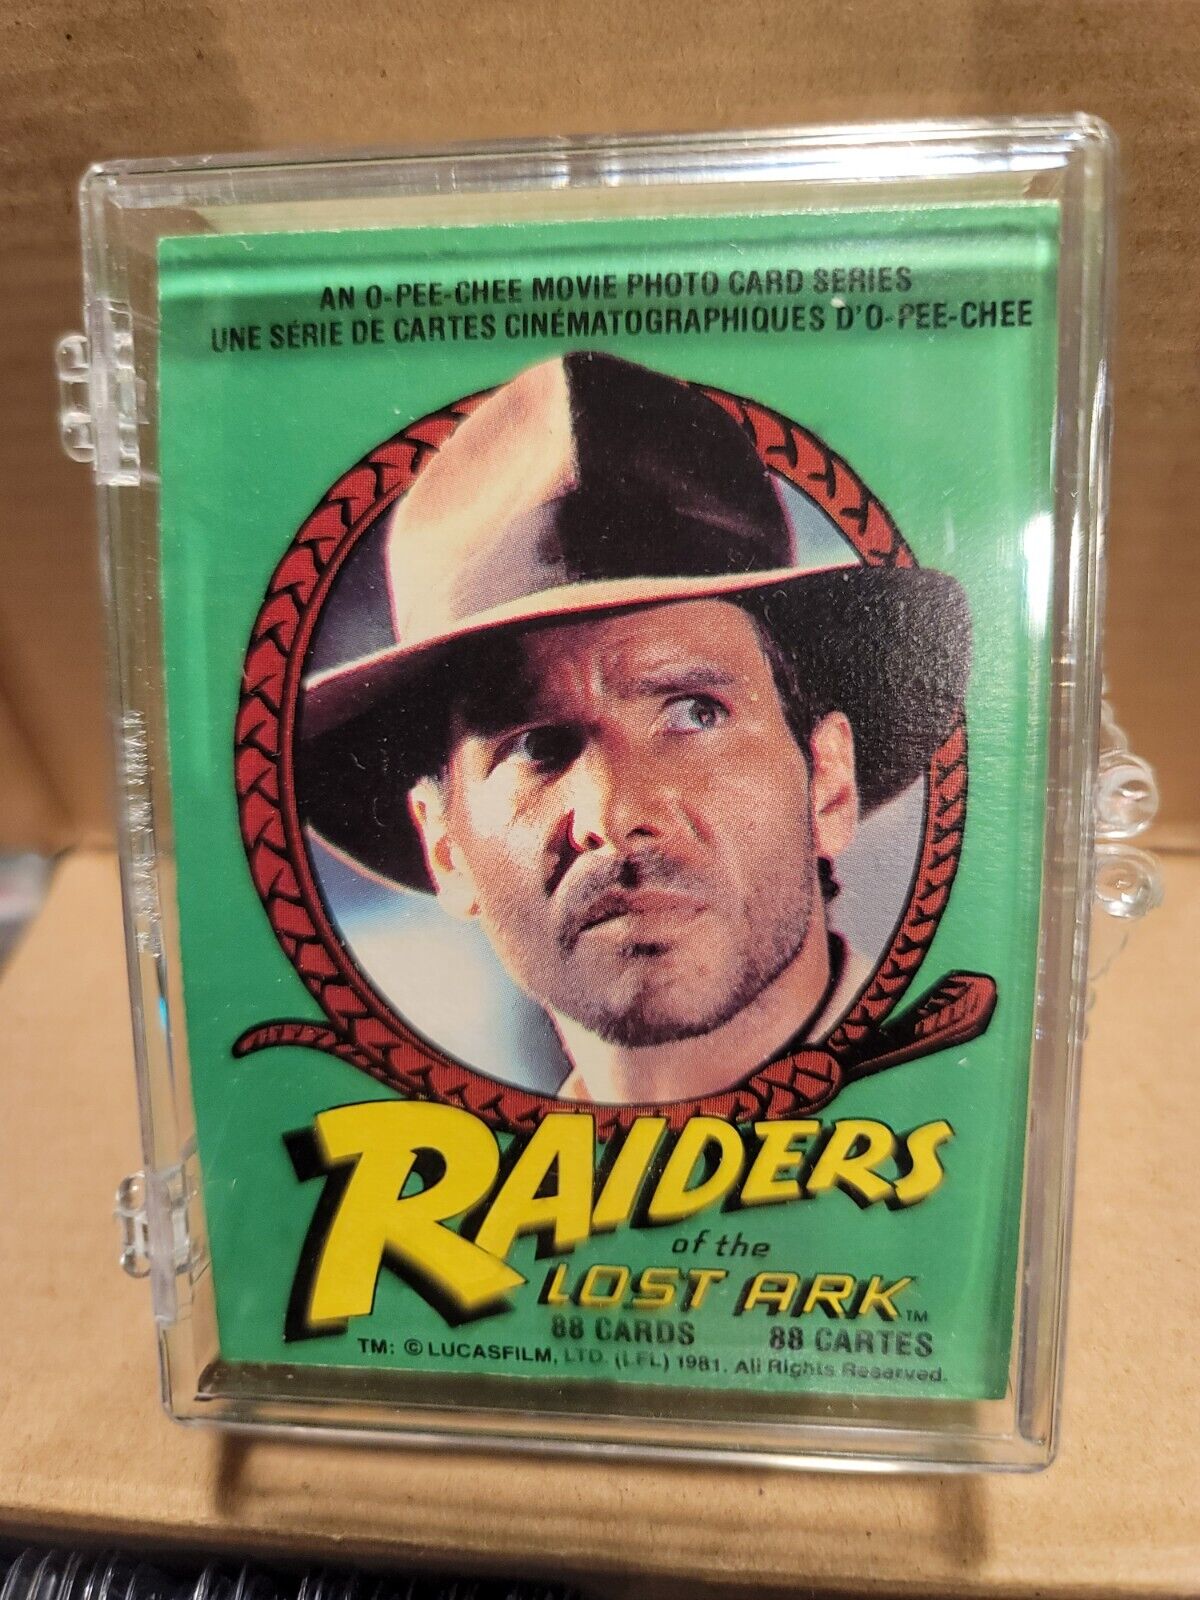 1981 Topps Indiana Jones And Raiders Of The Lost Ark Complete 88 Card Set 1-88